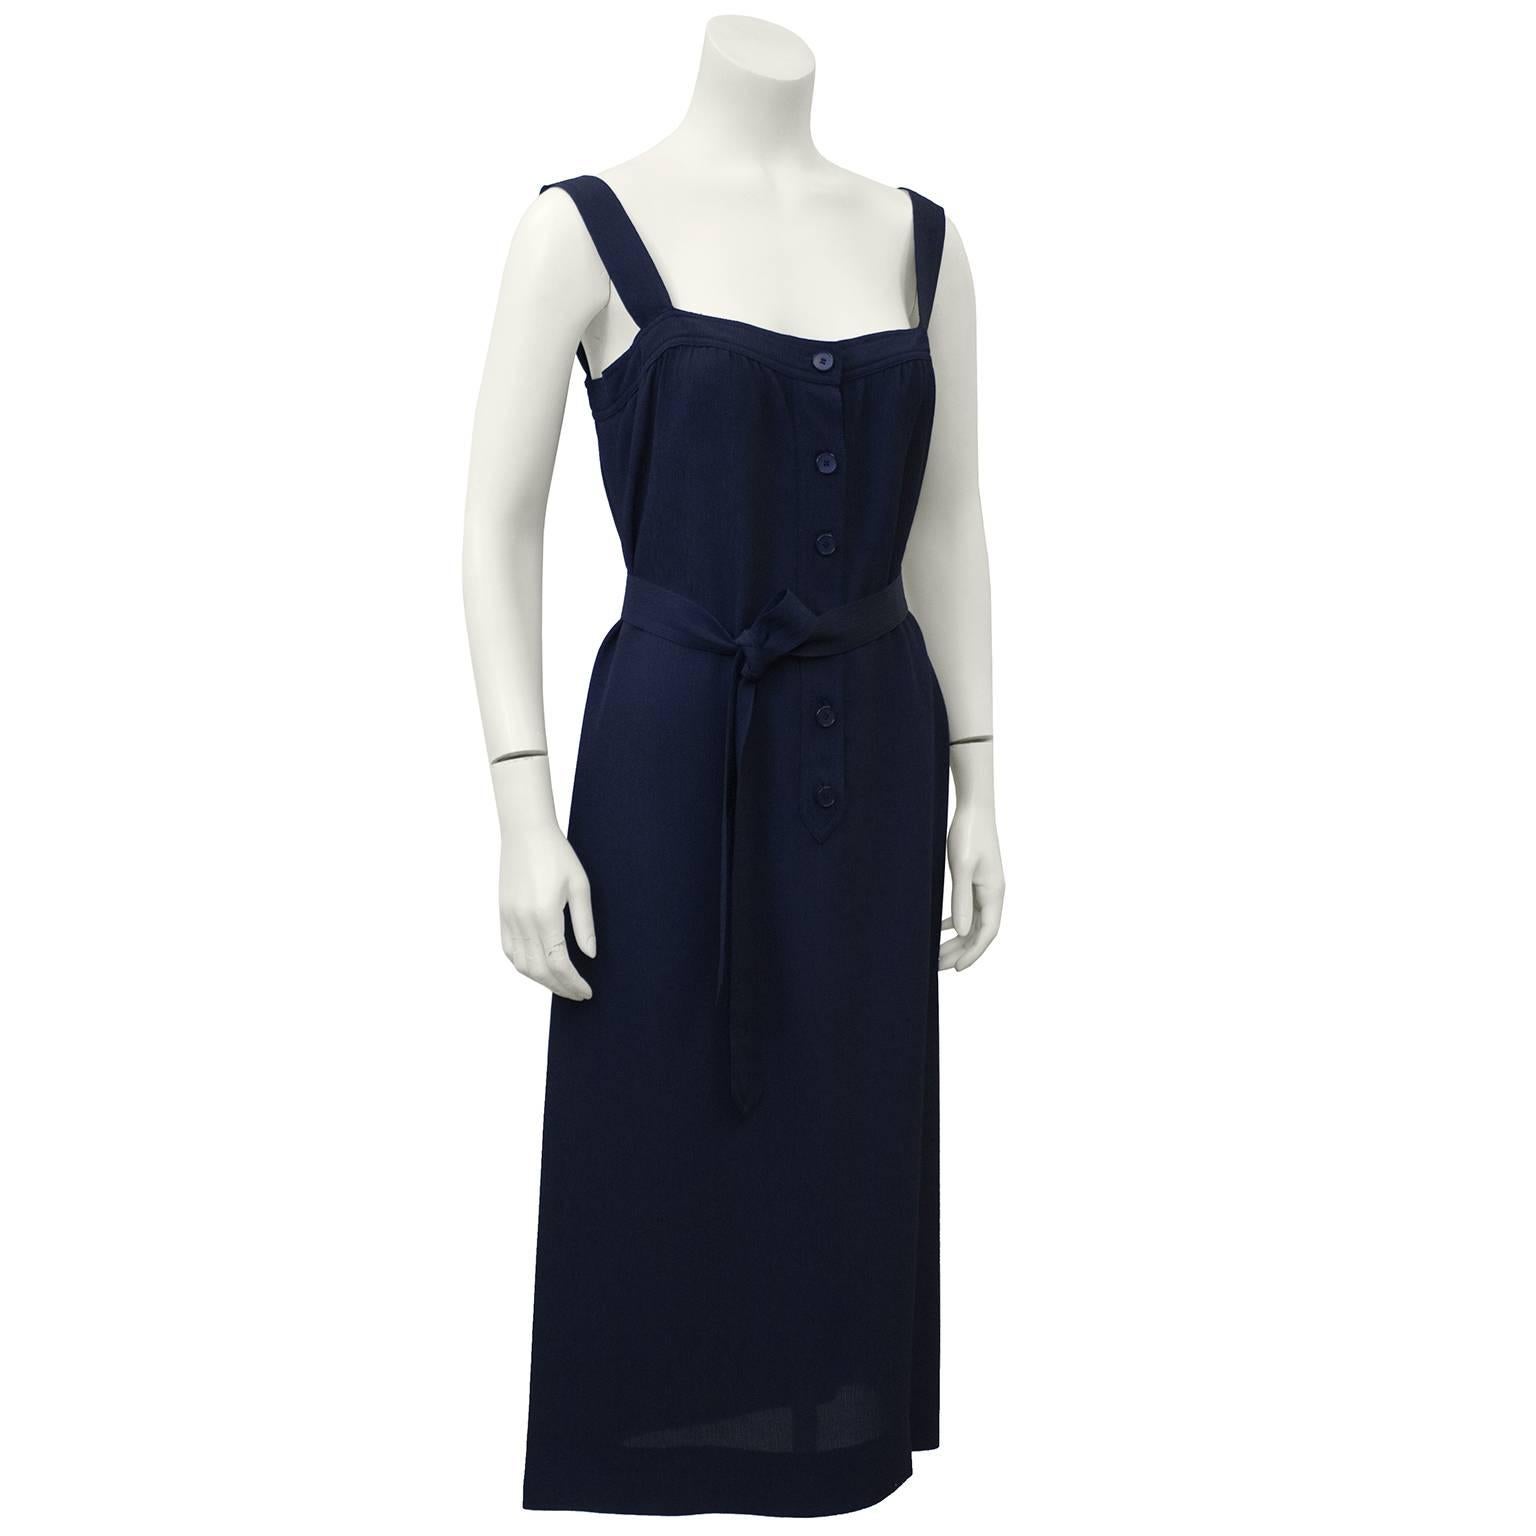 Early 1970's Givenchy Nouvelle label navy blue day dress. Square neck with tonal buttons down centre front. Optional belt that can be tied at waist to give the dress more shape or below bust for an empire look. Excellent vintage condition. Fits like